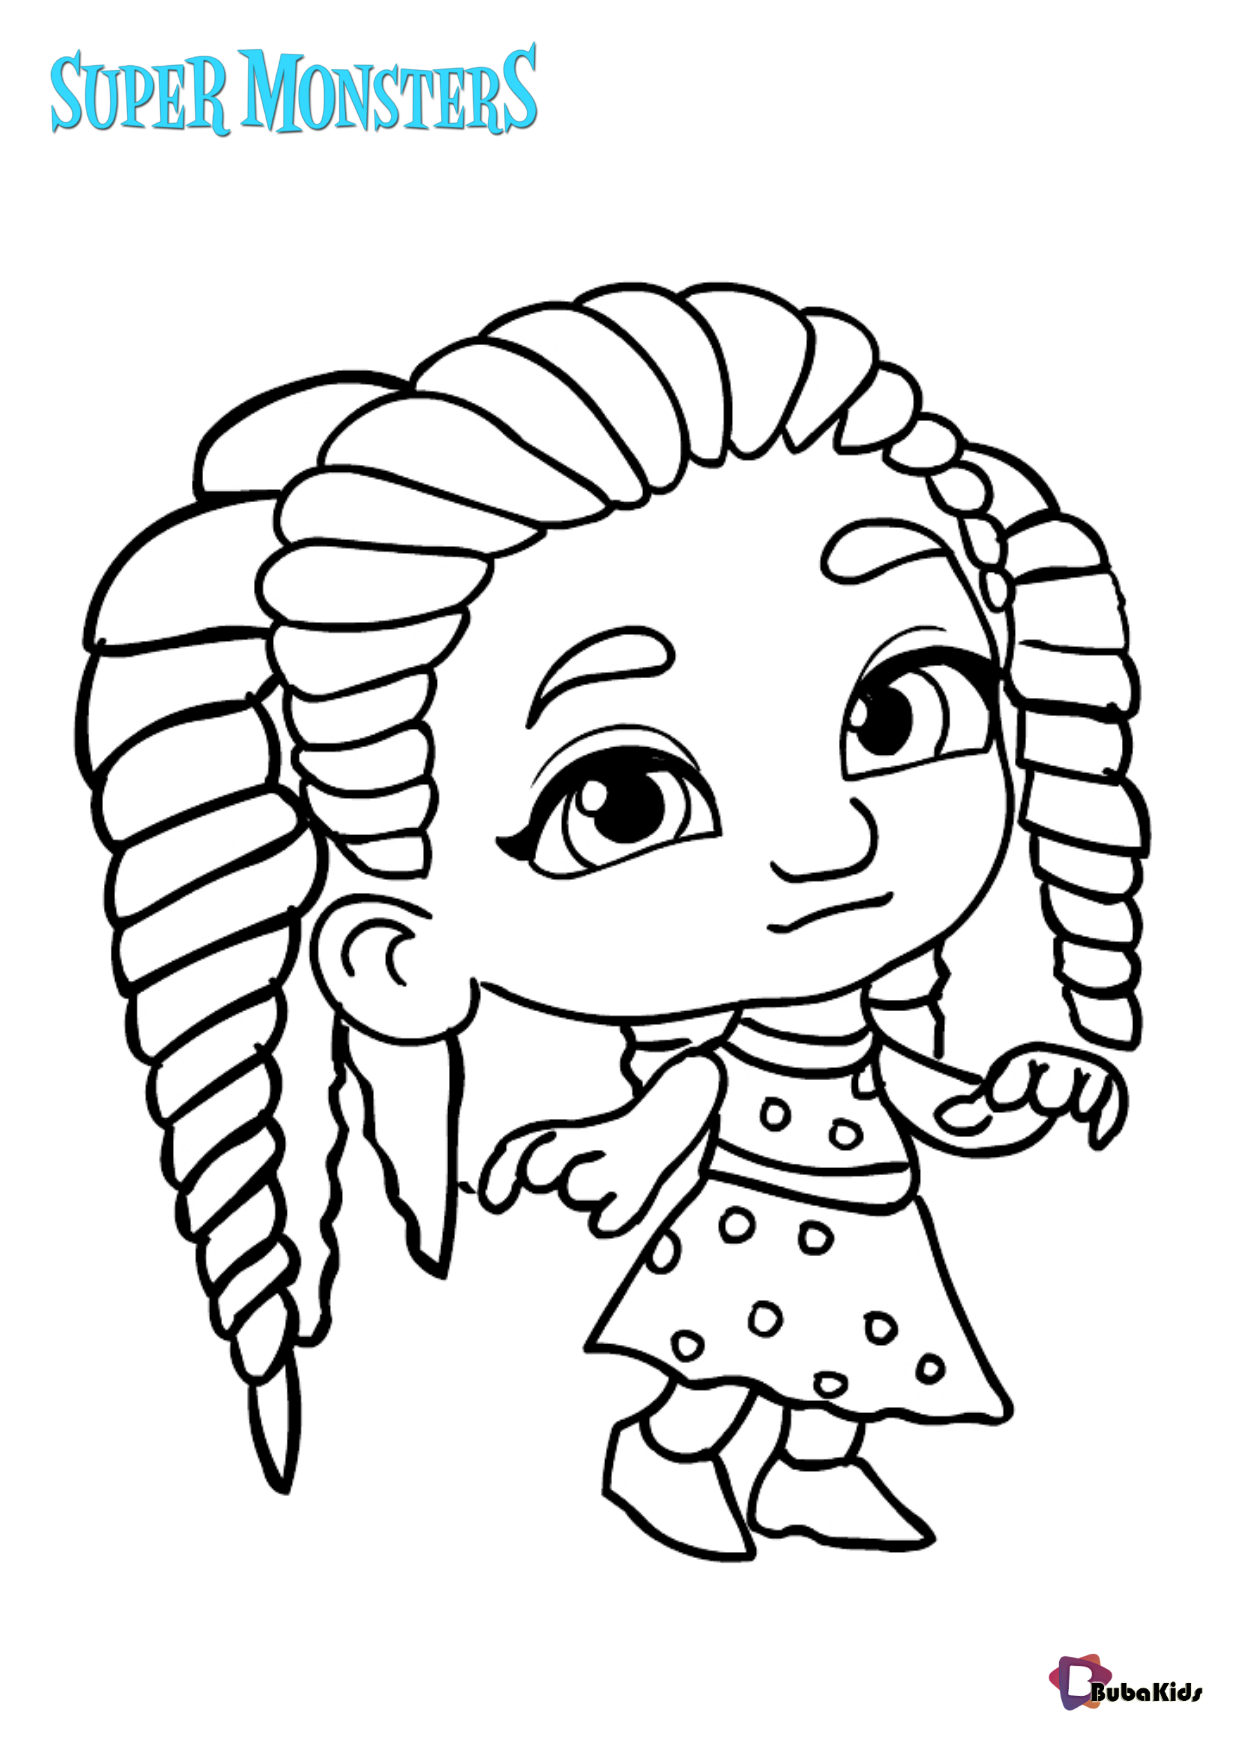 Super Monsters Coloring Pages Coloring Home